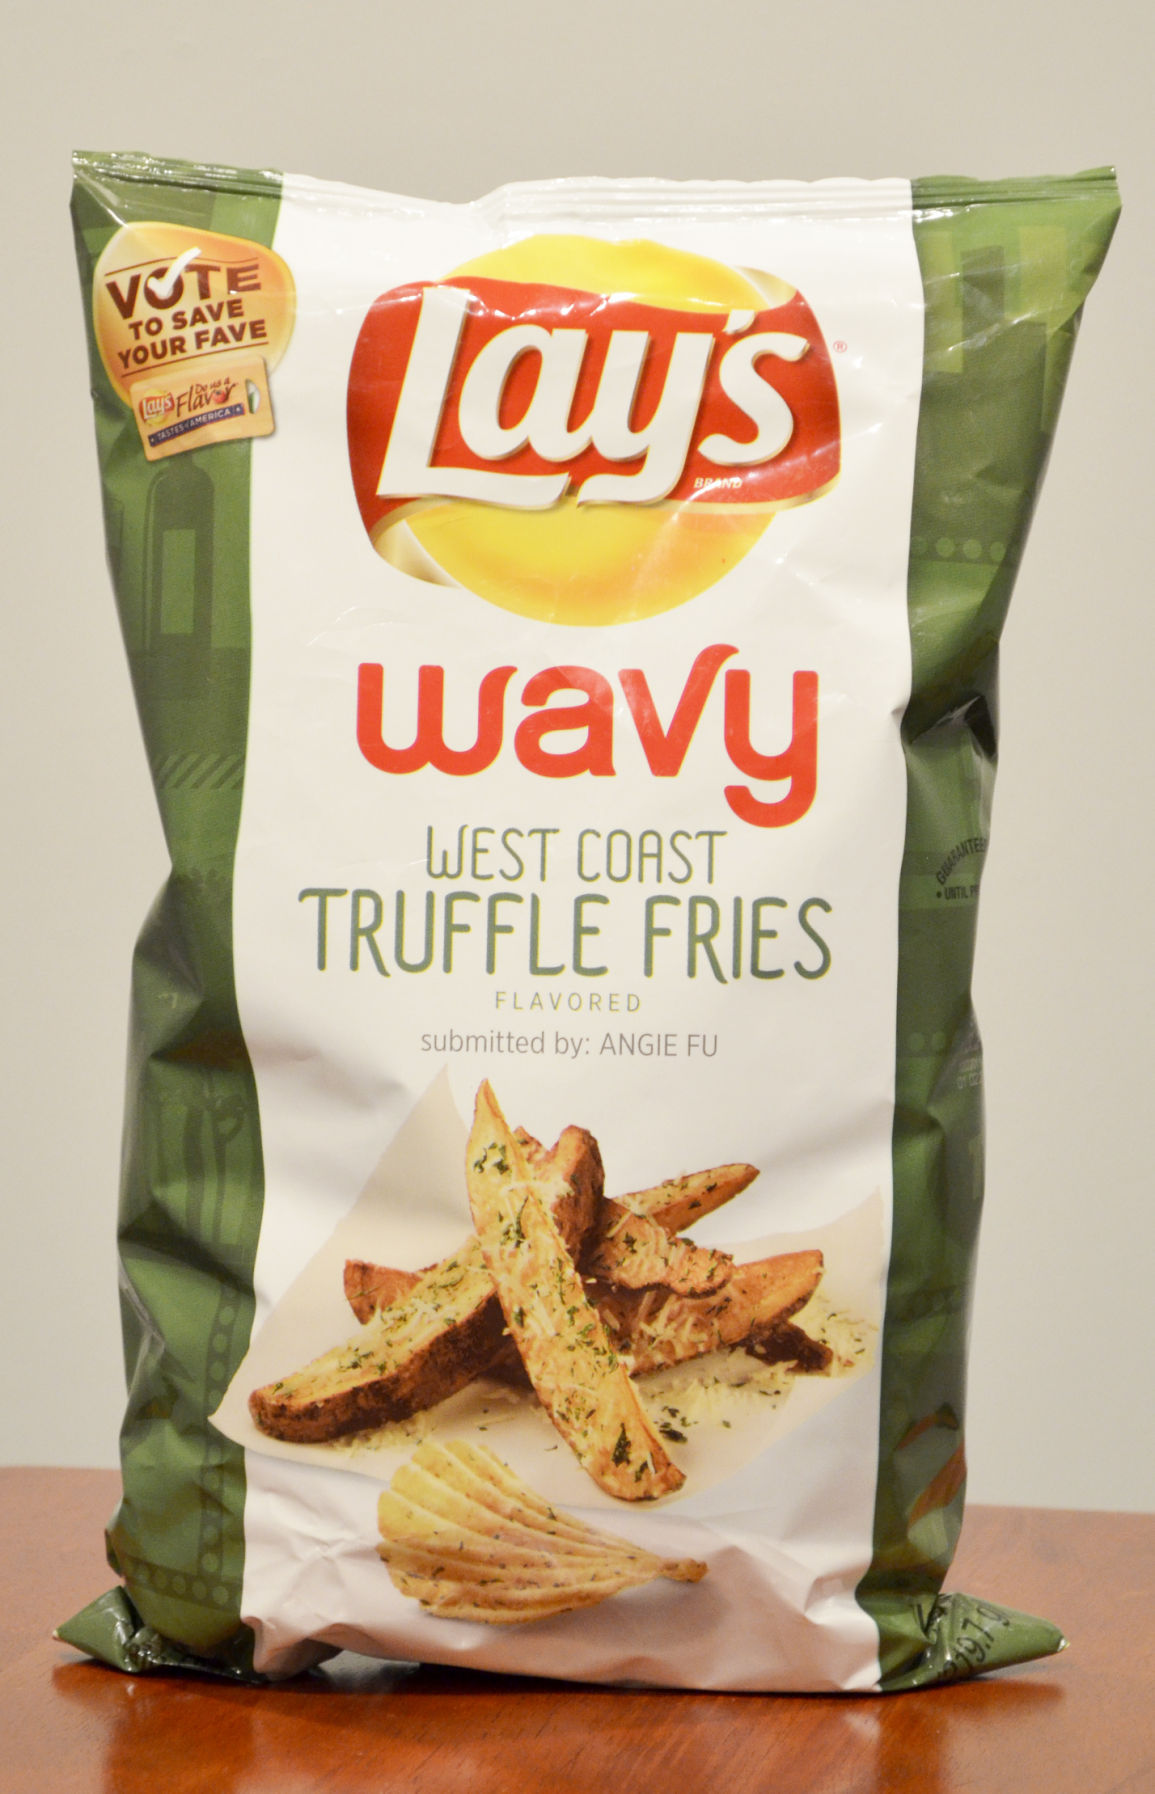 Chips ahoy: Lay's gets freaky with some outrageous flavors | Weekender ...